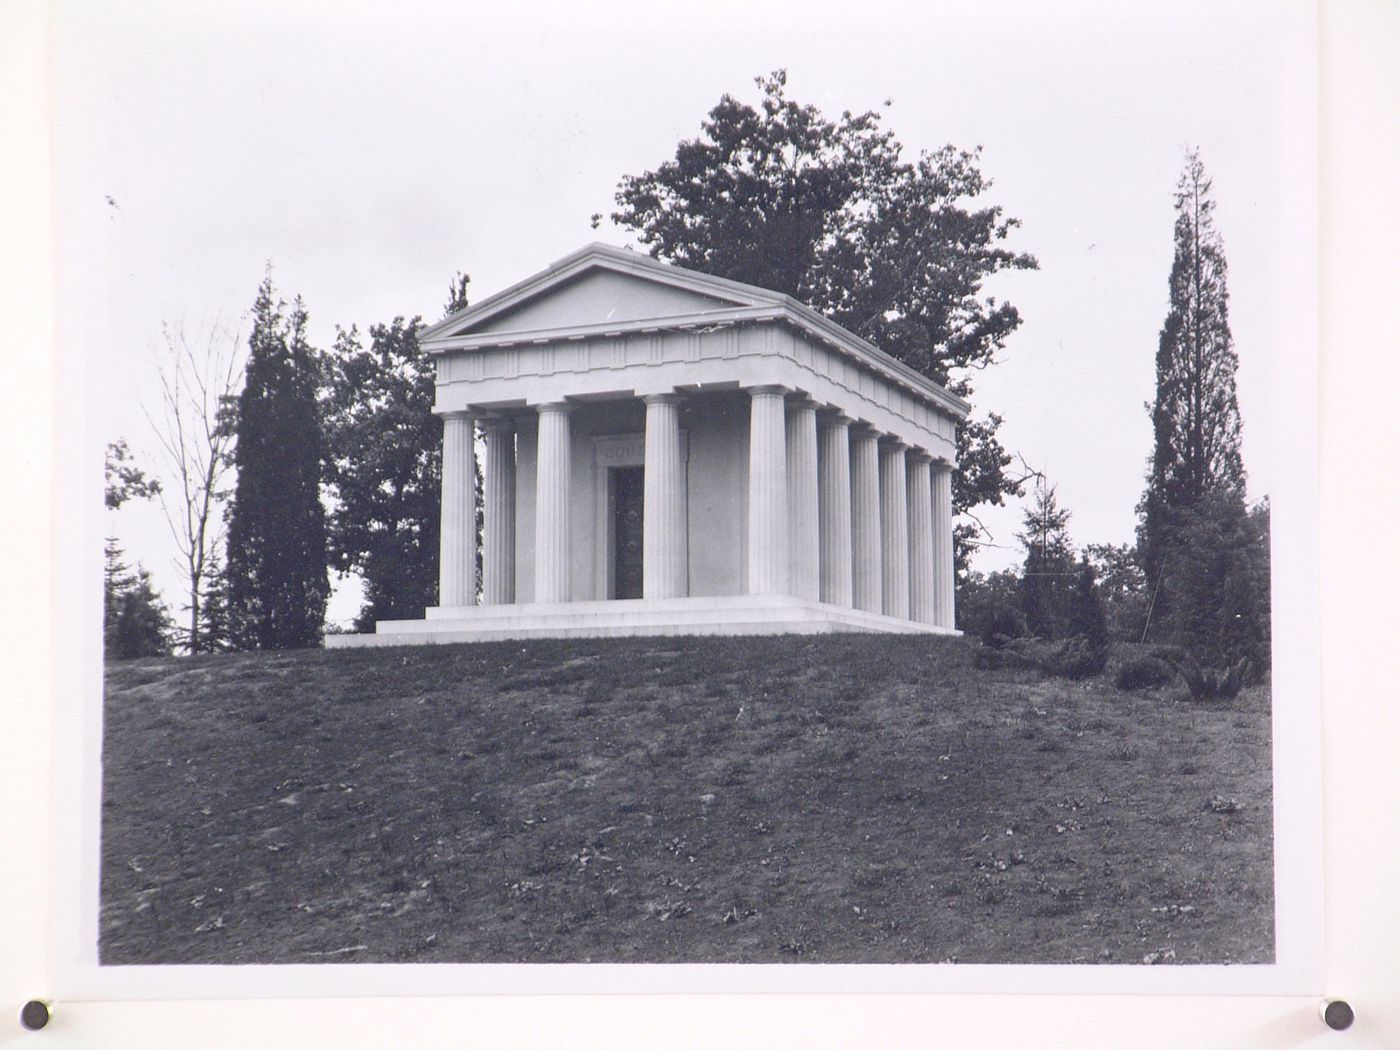 View of the principal and lateral façades of the Couzens Mausoleum, Detroit [?], Michigan [?]